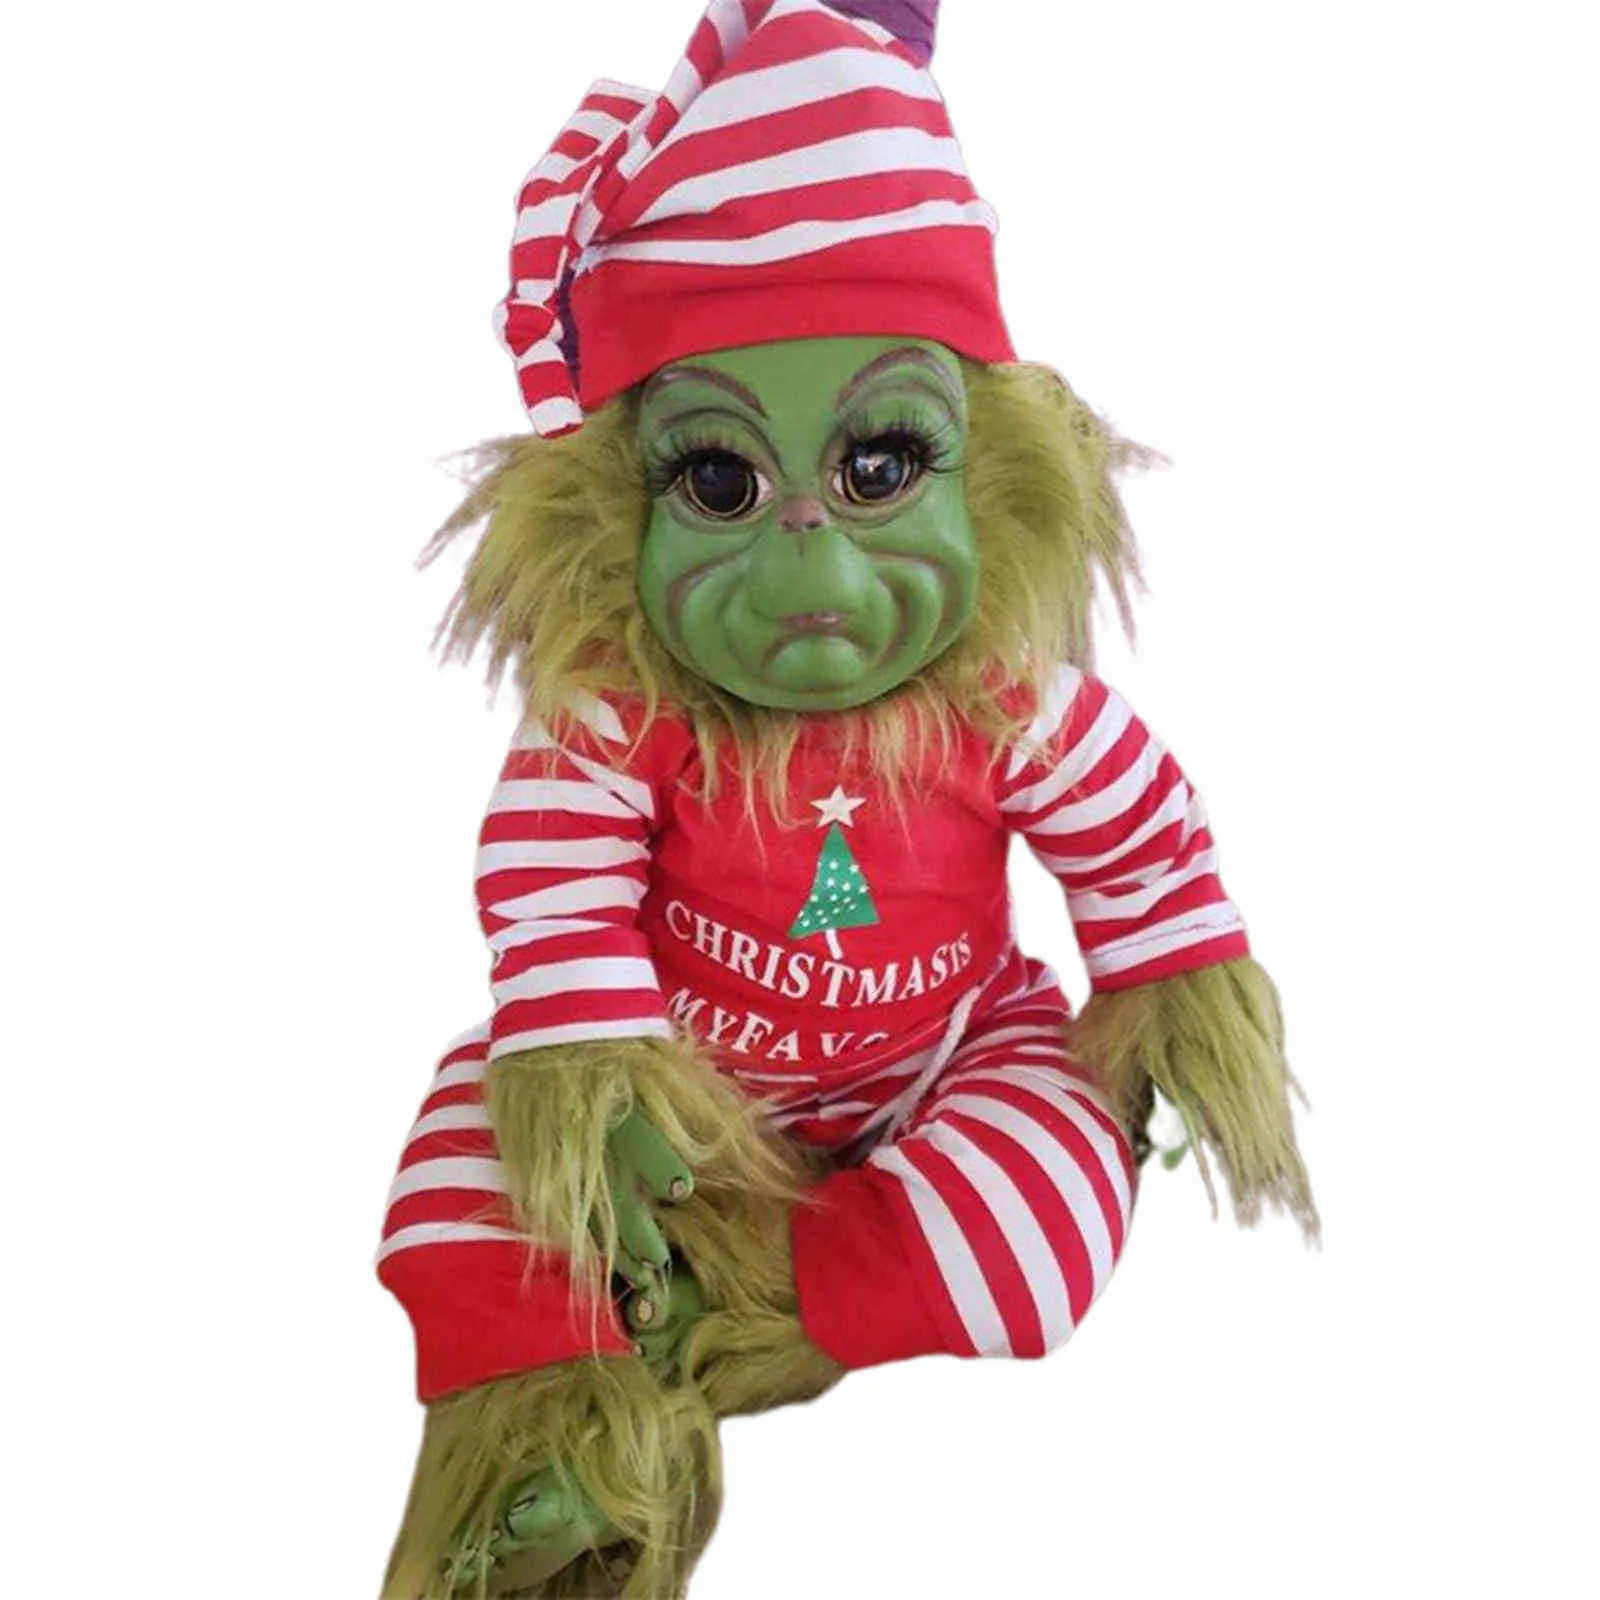 Grinch Doll Cute Christmas Stuffed Plush Toy Xmas Gifts for Kids Home Decoration In Stock 2111098007179